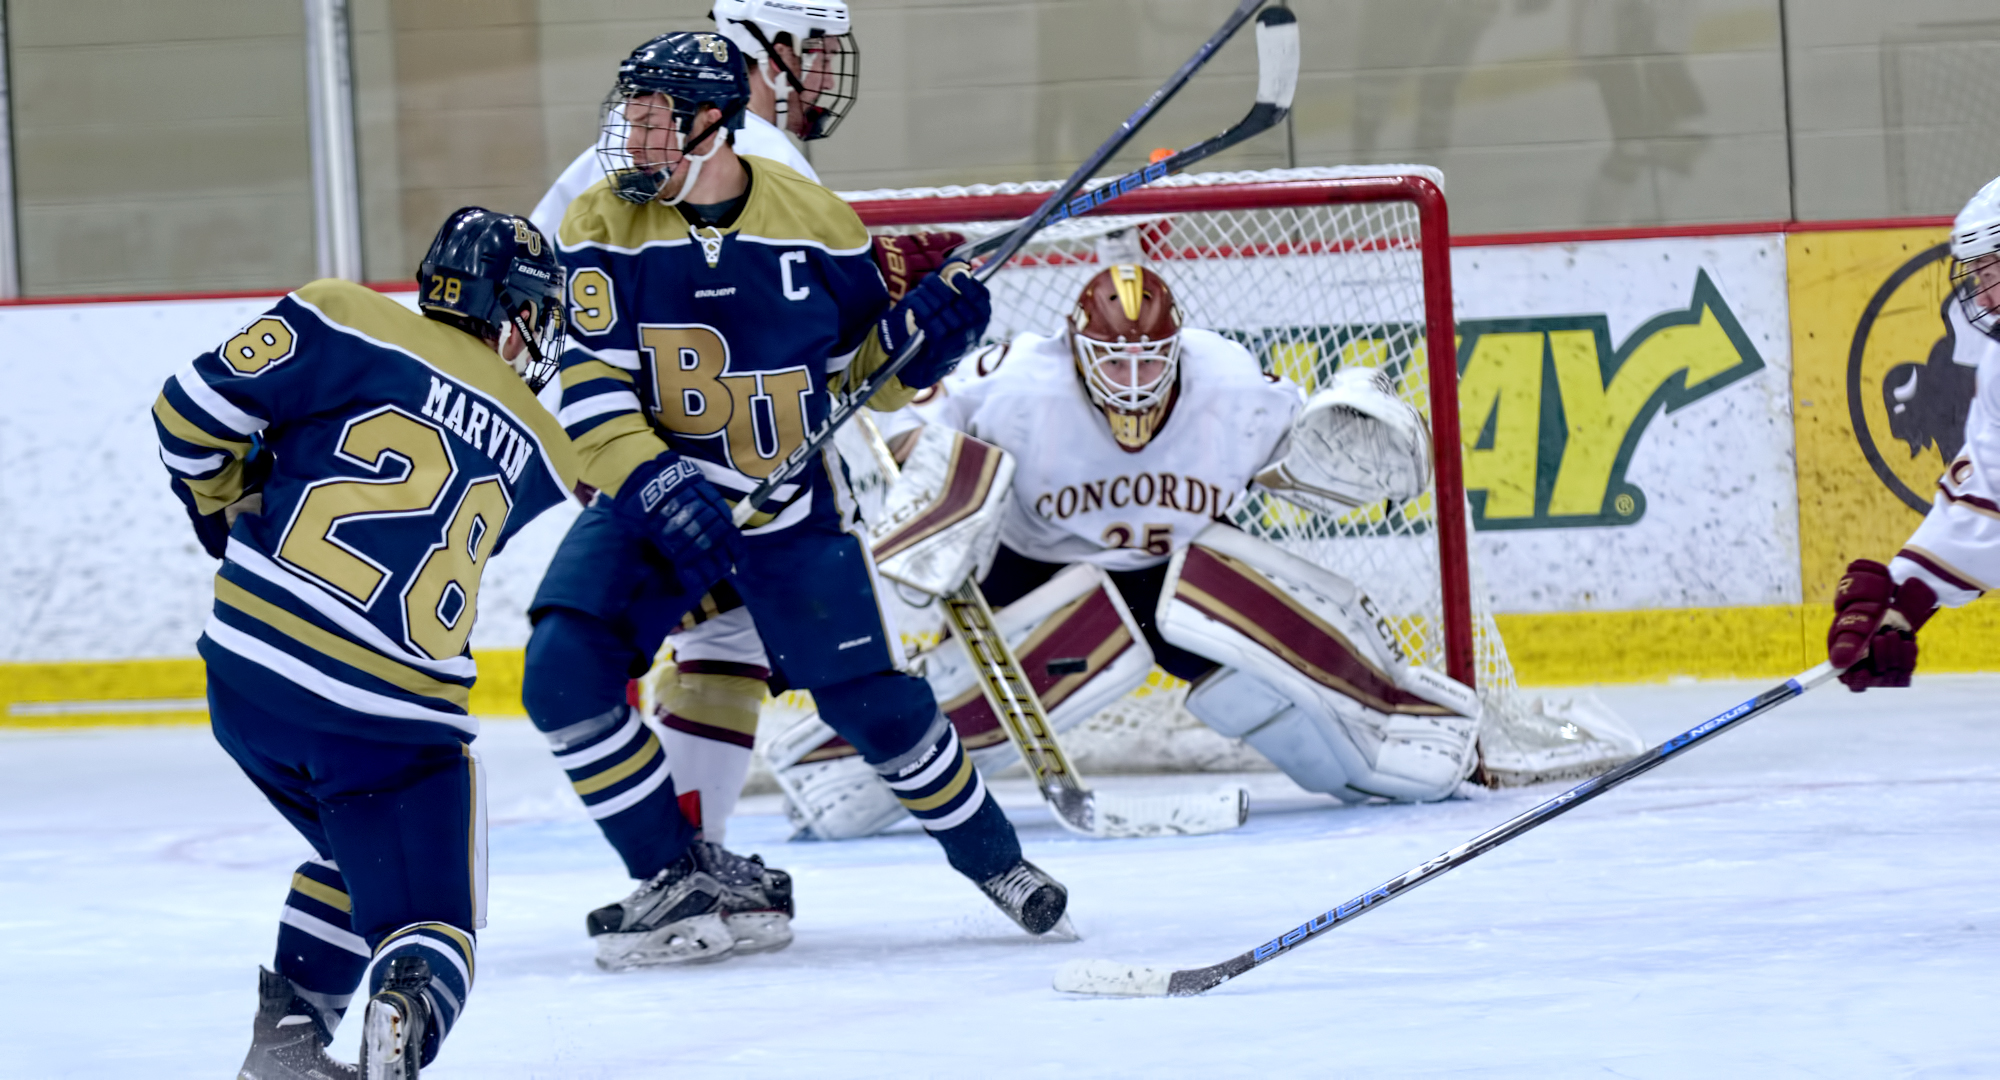 Sophomore goalie Sam Nelson concentrates on the puck after a shot by a Bethel attacker in the second period of the Cobbers' game with the Royals.